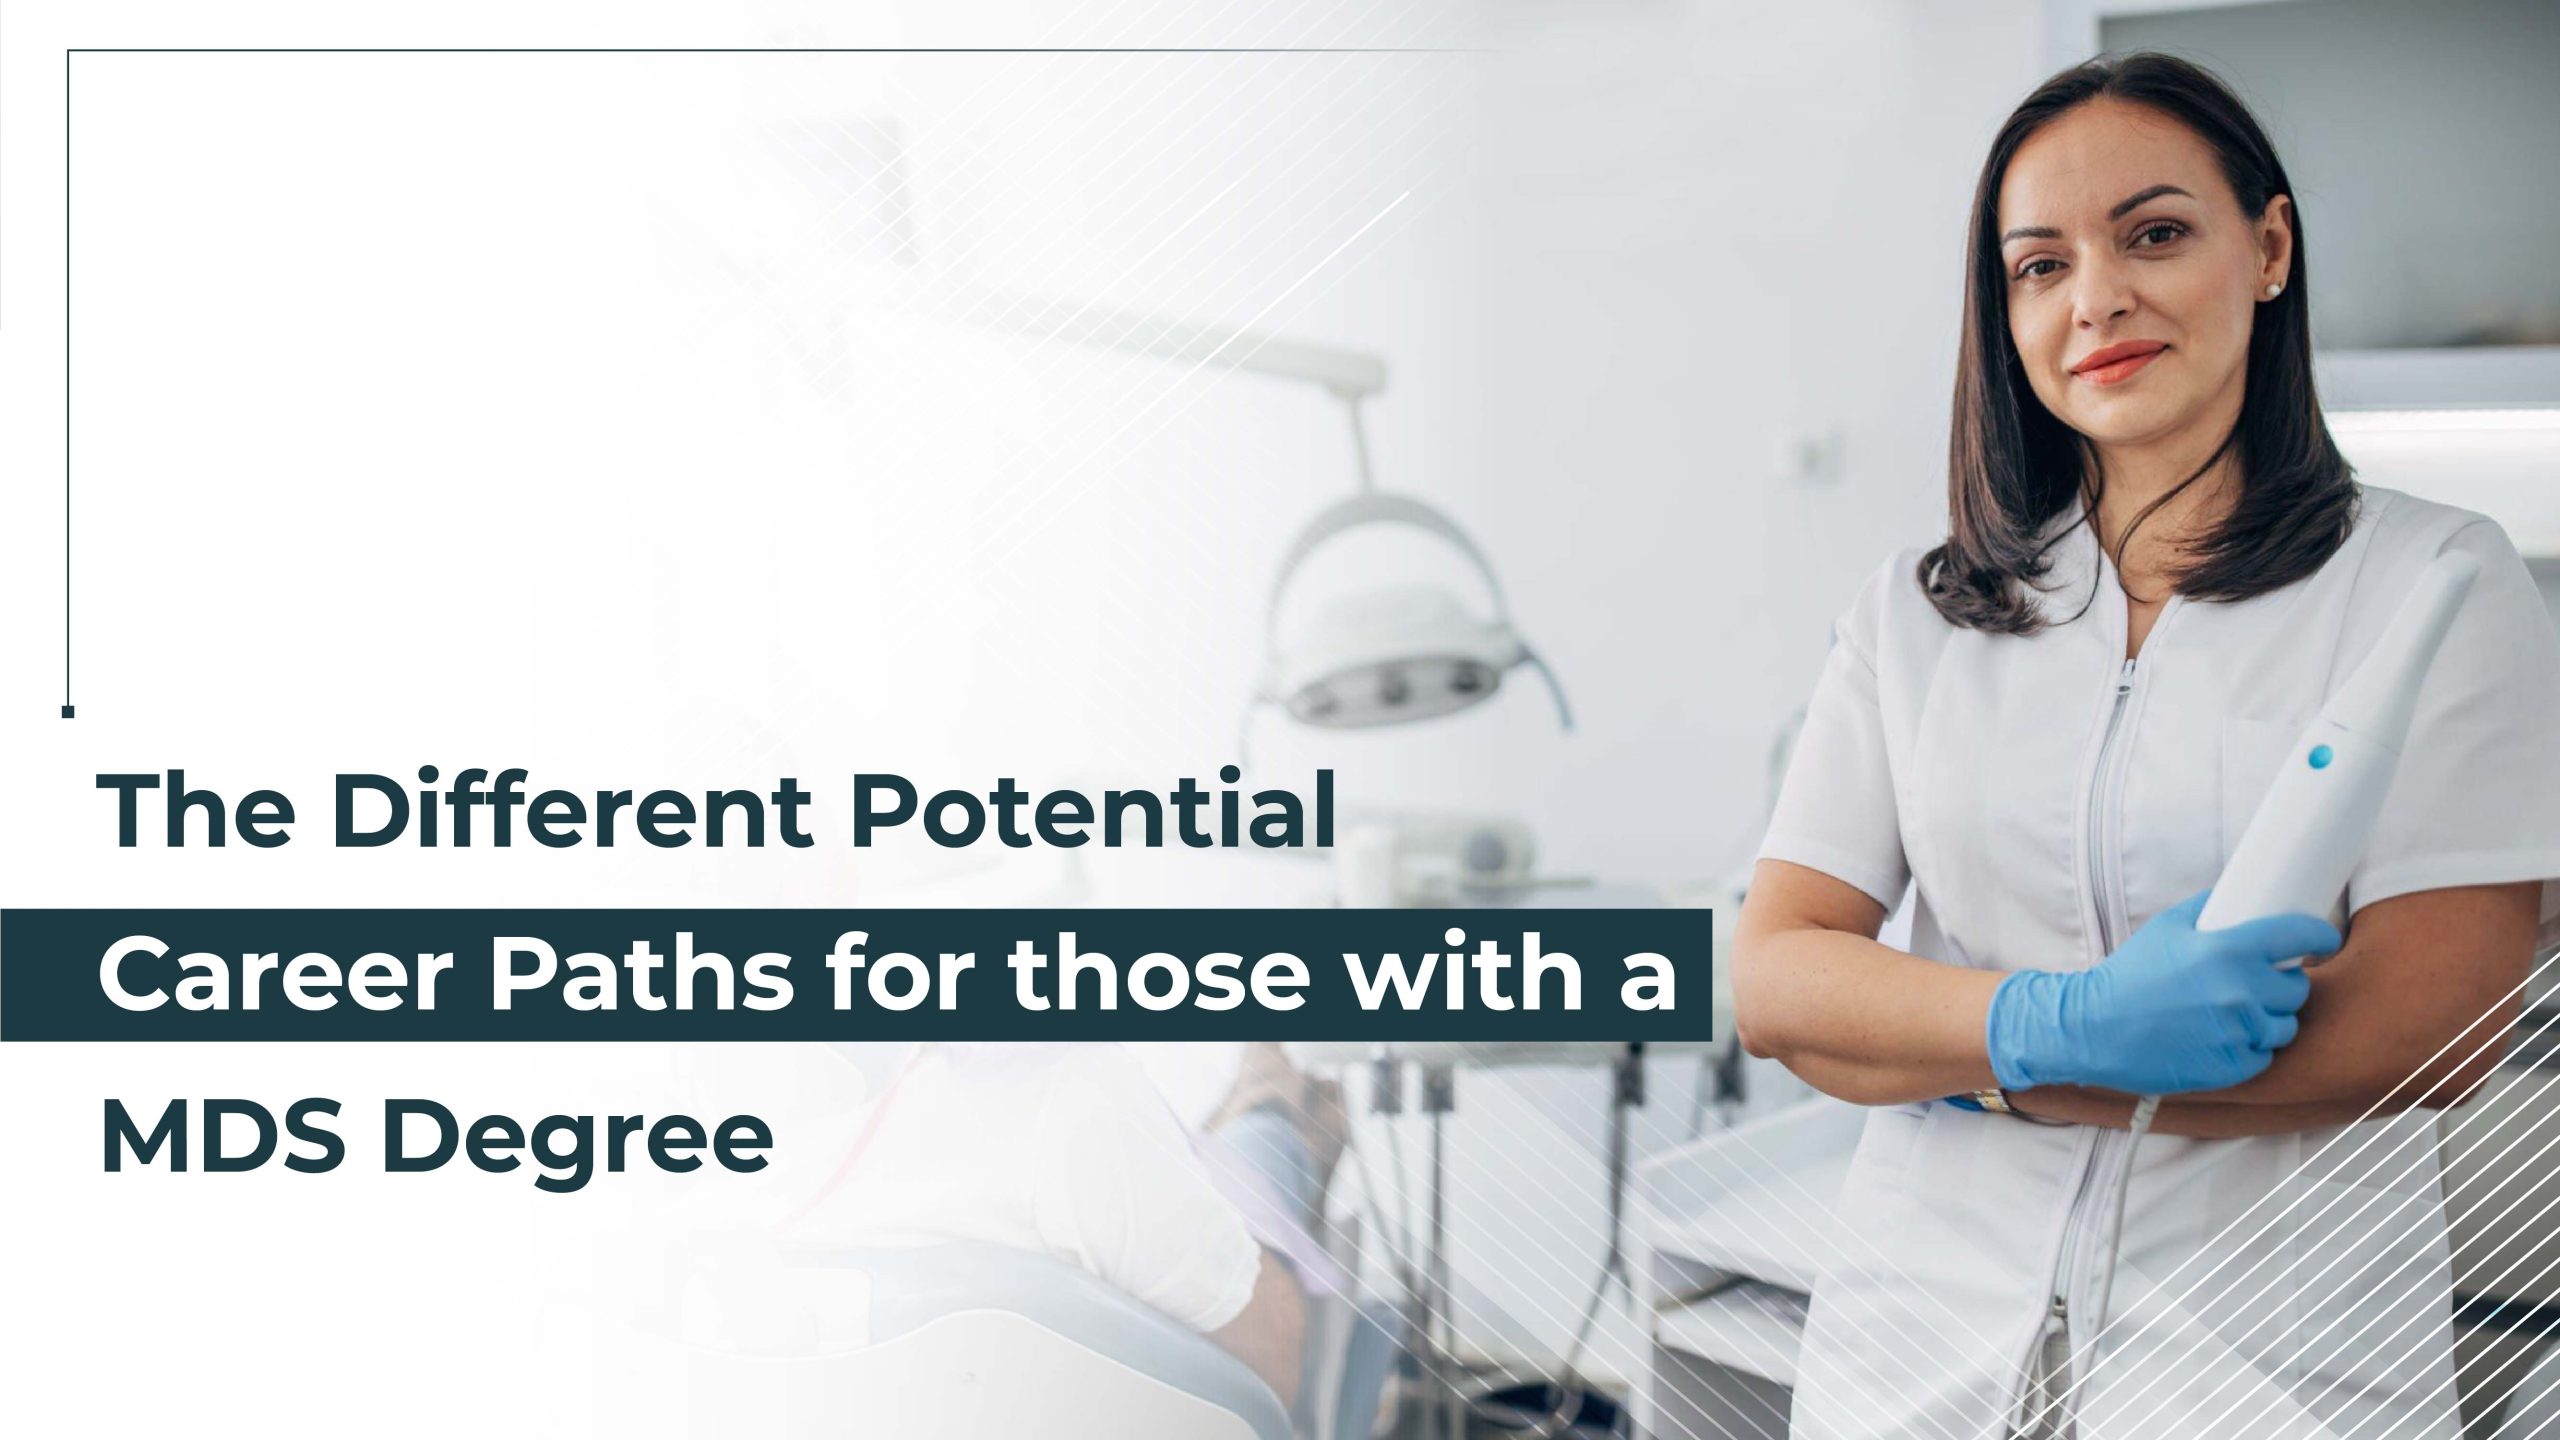 The Different Potential Career Paths for Those with a MDS Degree